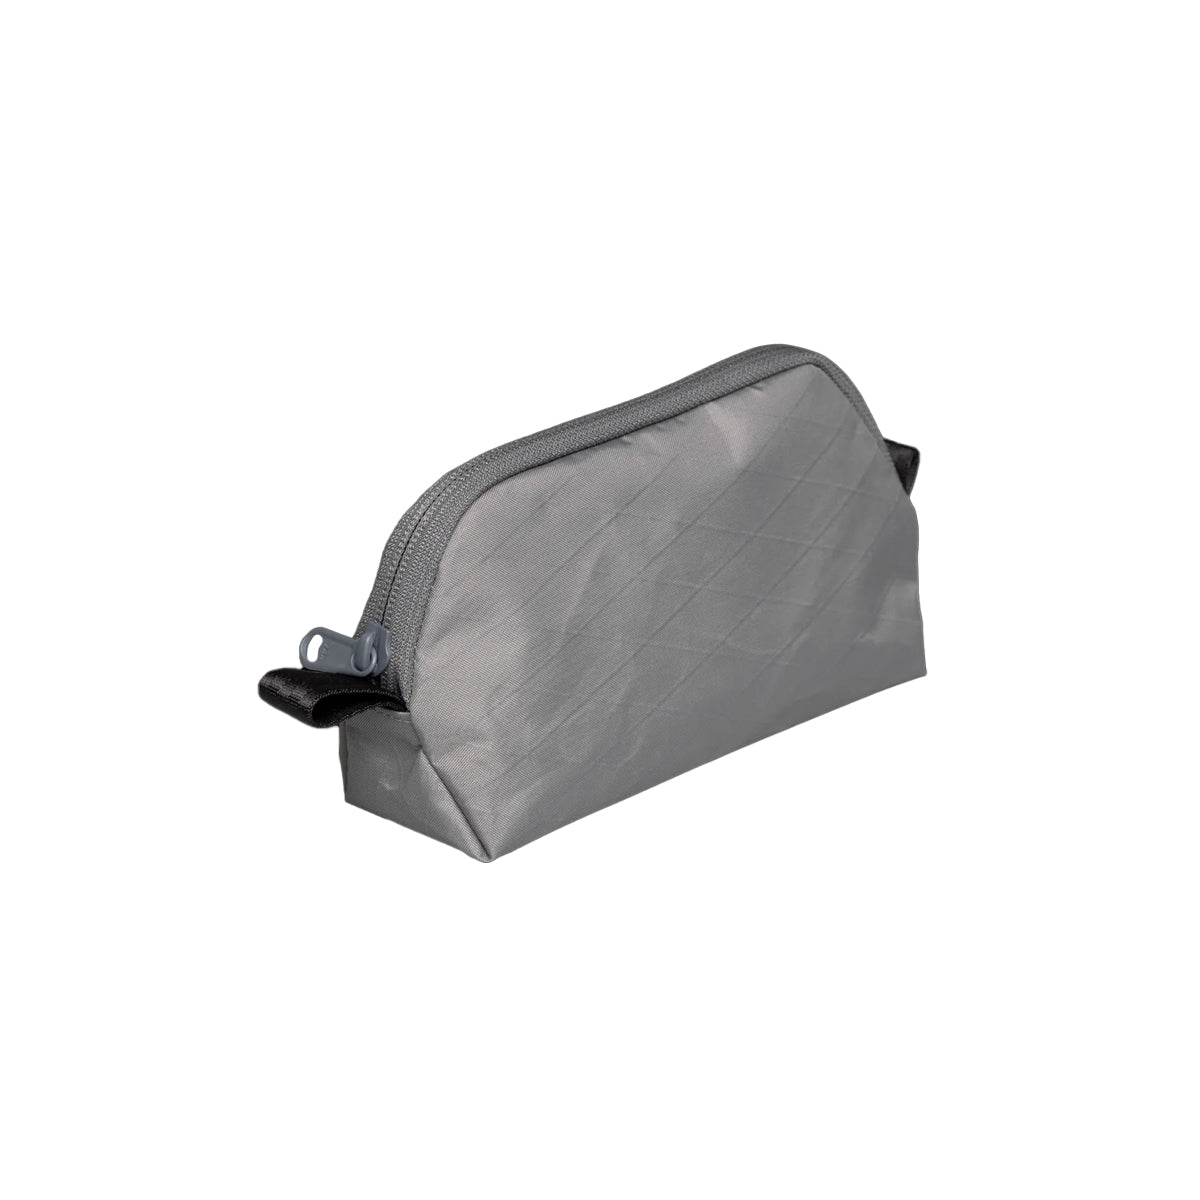 Able Carry : The Daily Stash Pouch : X-Pac Castlerock Grey (VX21)